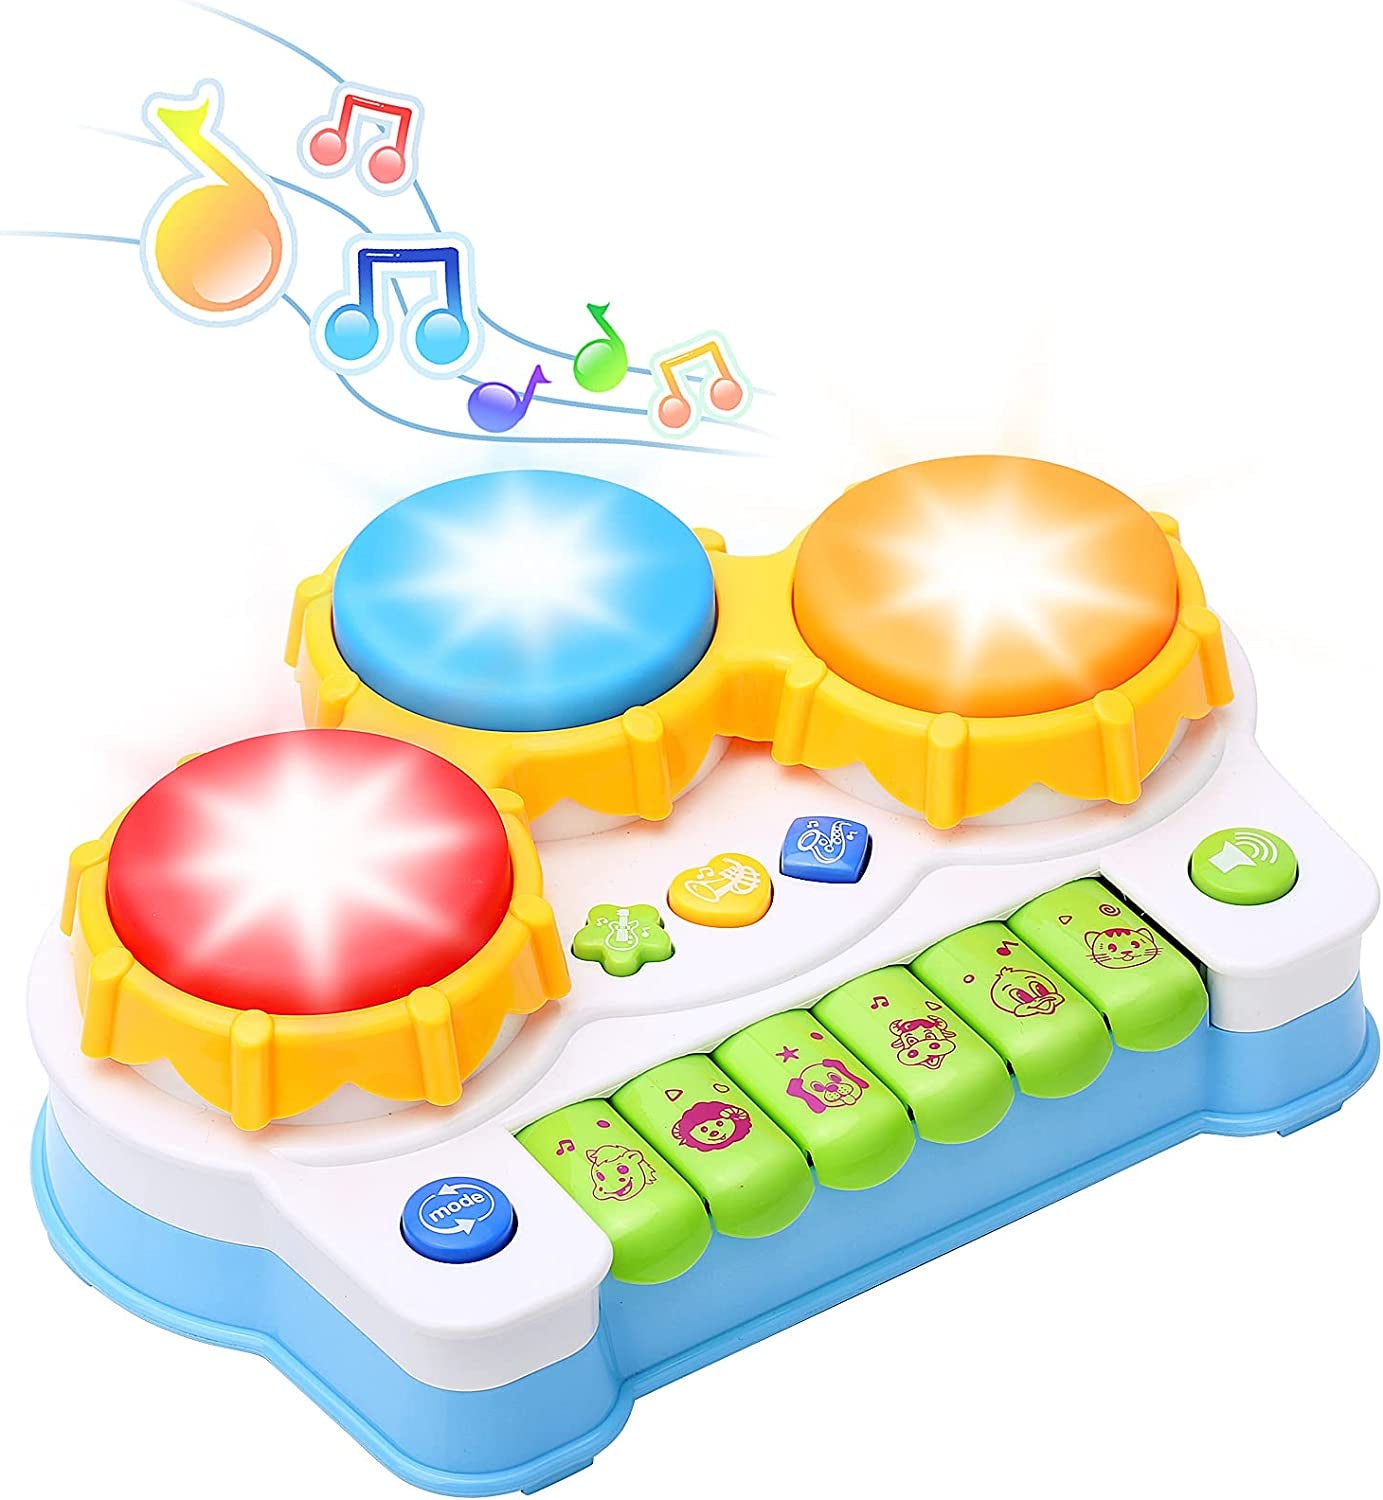 Baby Musical Keyboard Piano Drum Set,Learning Light up Toy, Early Educamional Montessori Toys for Babies Toddler Boys Girls Birthday